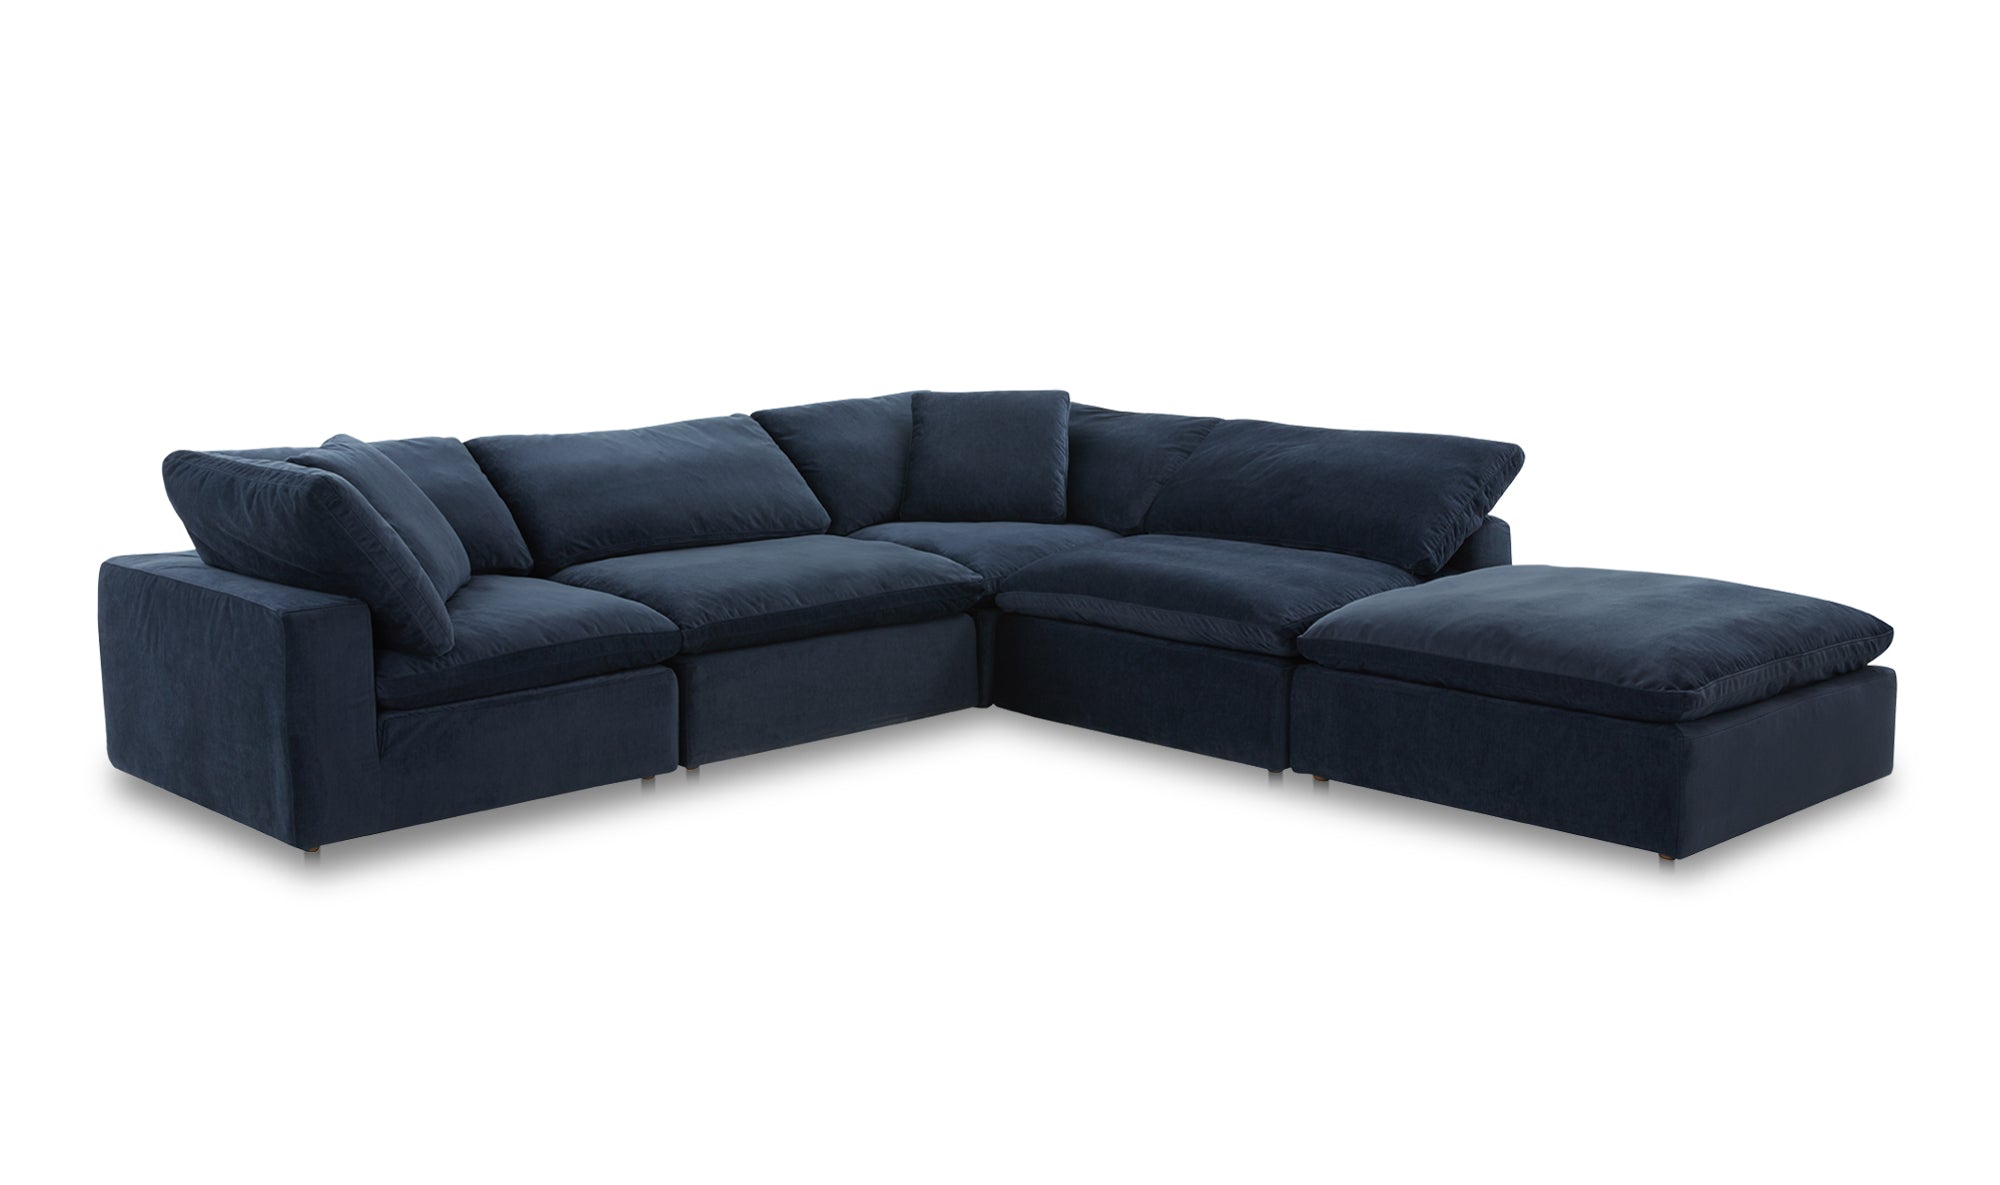 Clay Dream Modular Sectional Performance Fabric - Nocturnal Sky